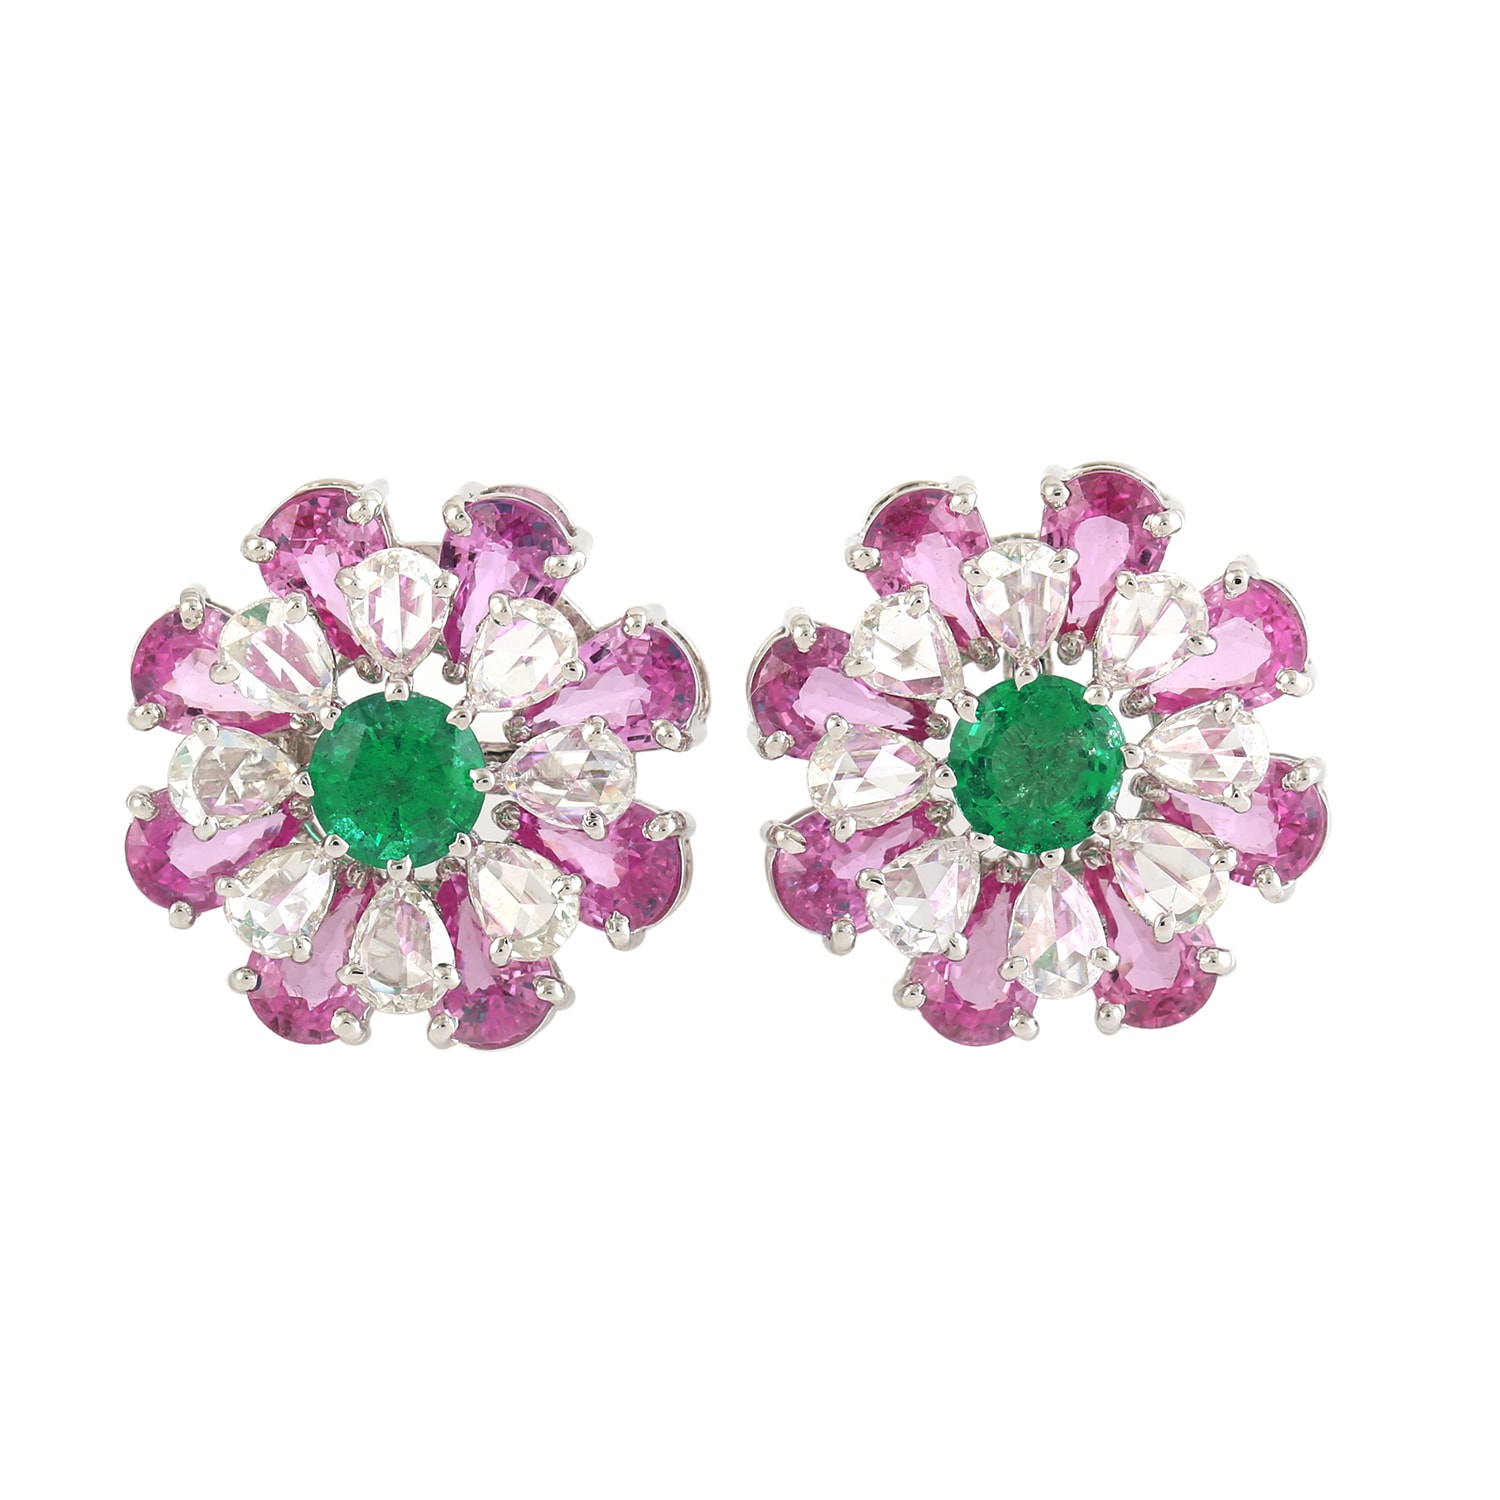 Women’s White / Pink / Purple Pear Shape Rose Cut Diamond & Pink Sapphire With Emerald In 18K White Gold Floral Stud Earrings Artisan